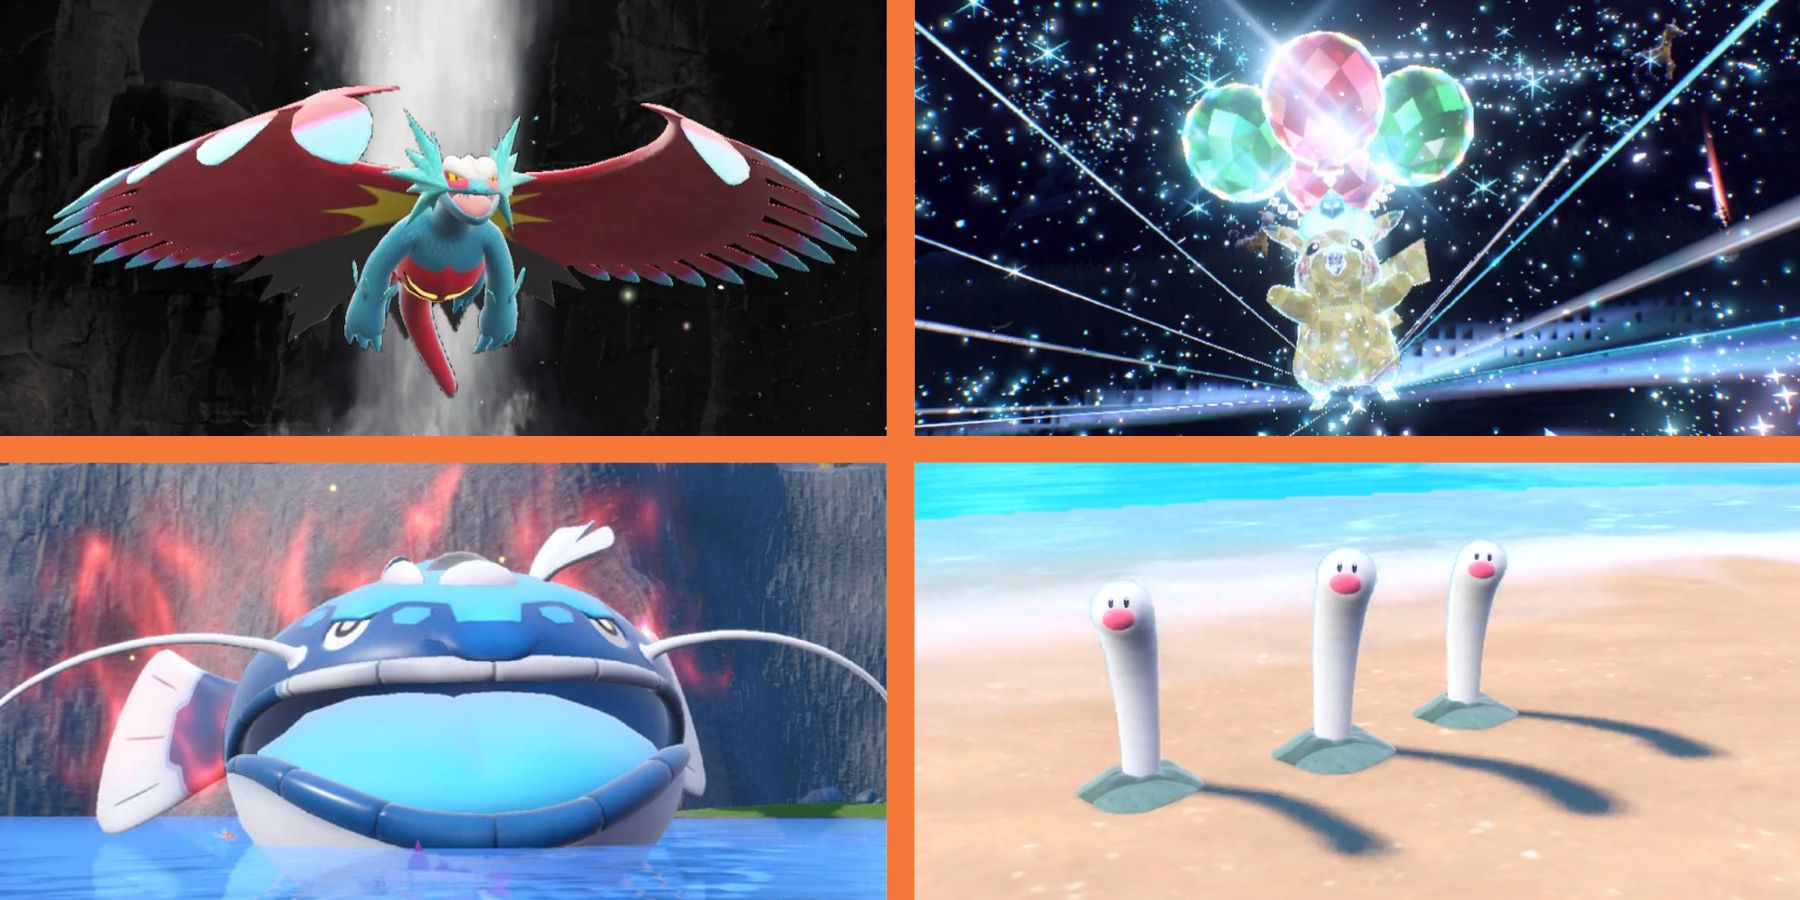 Pokemon Scarlet  and Violet has multiple gimmicks, including those seen here with Paradox Pokemon, Terastallization, Titan Pokemon, and Regional Fakes.